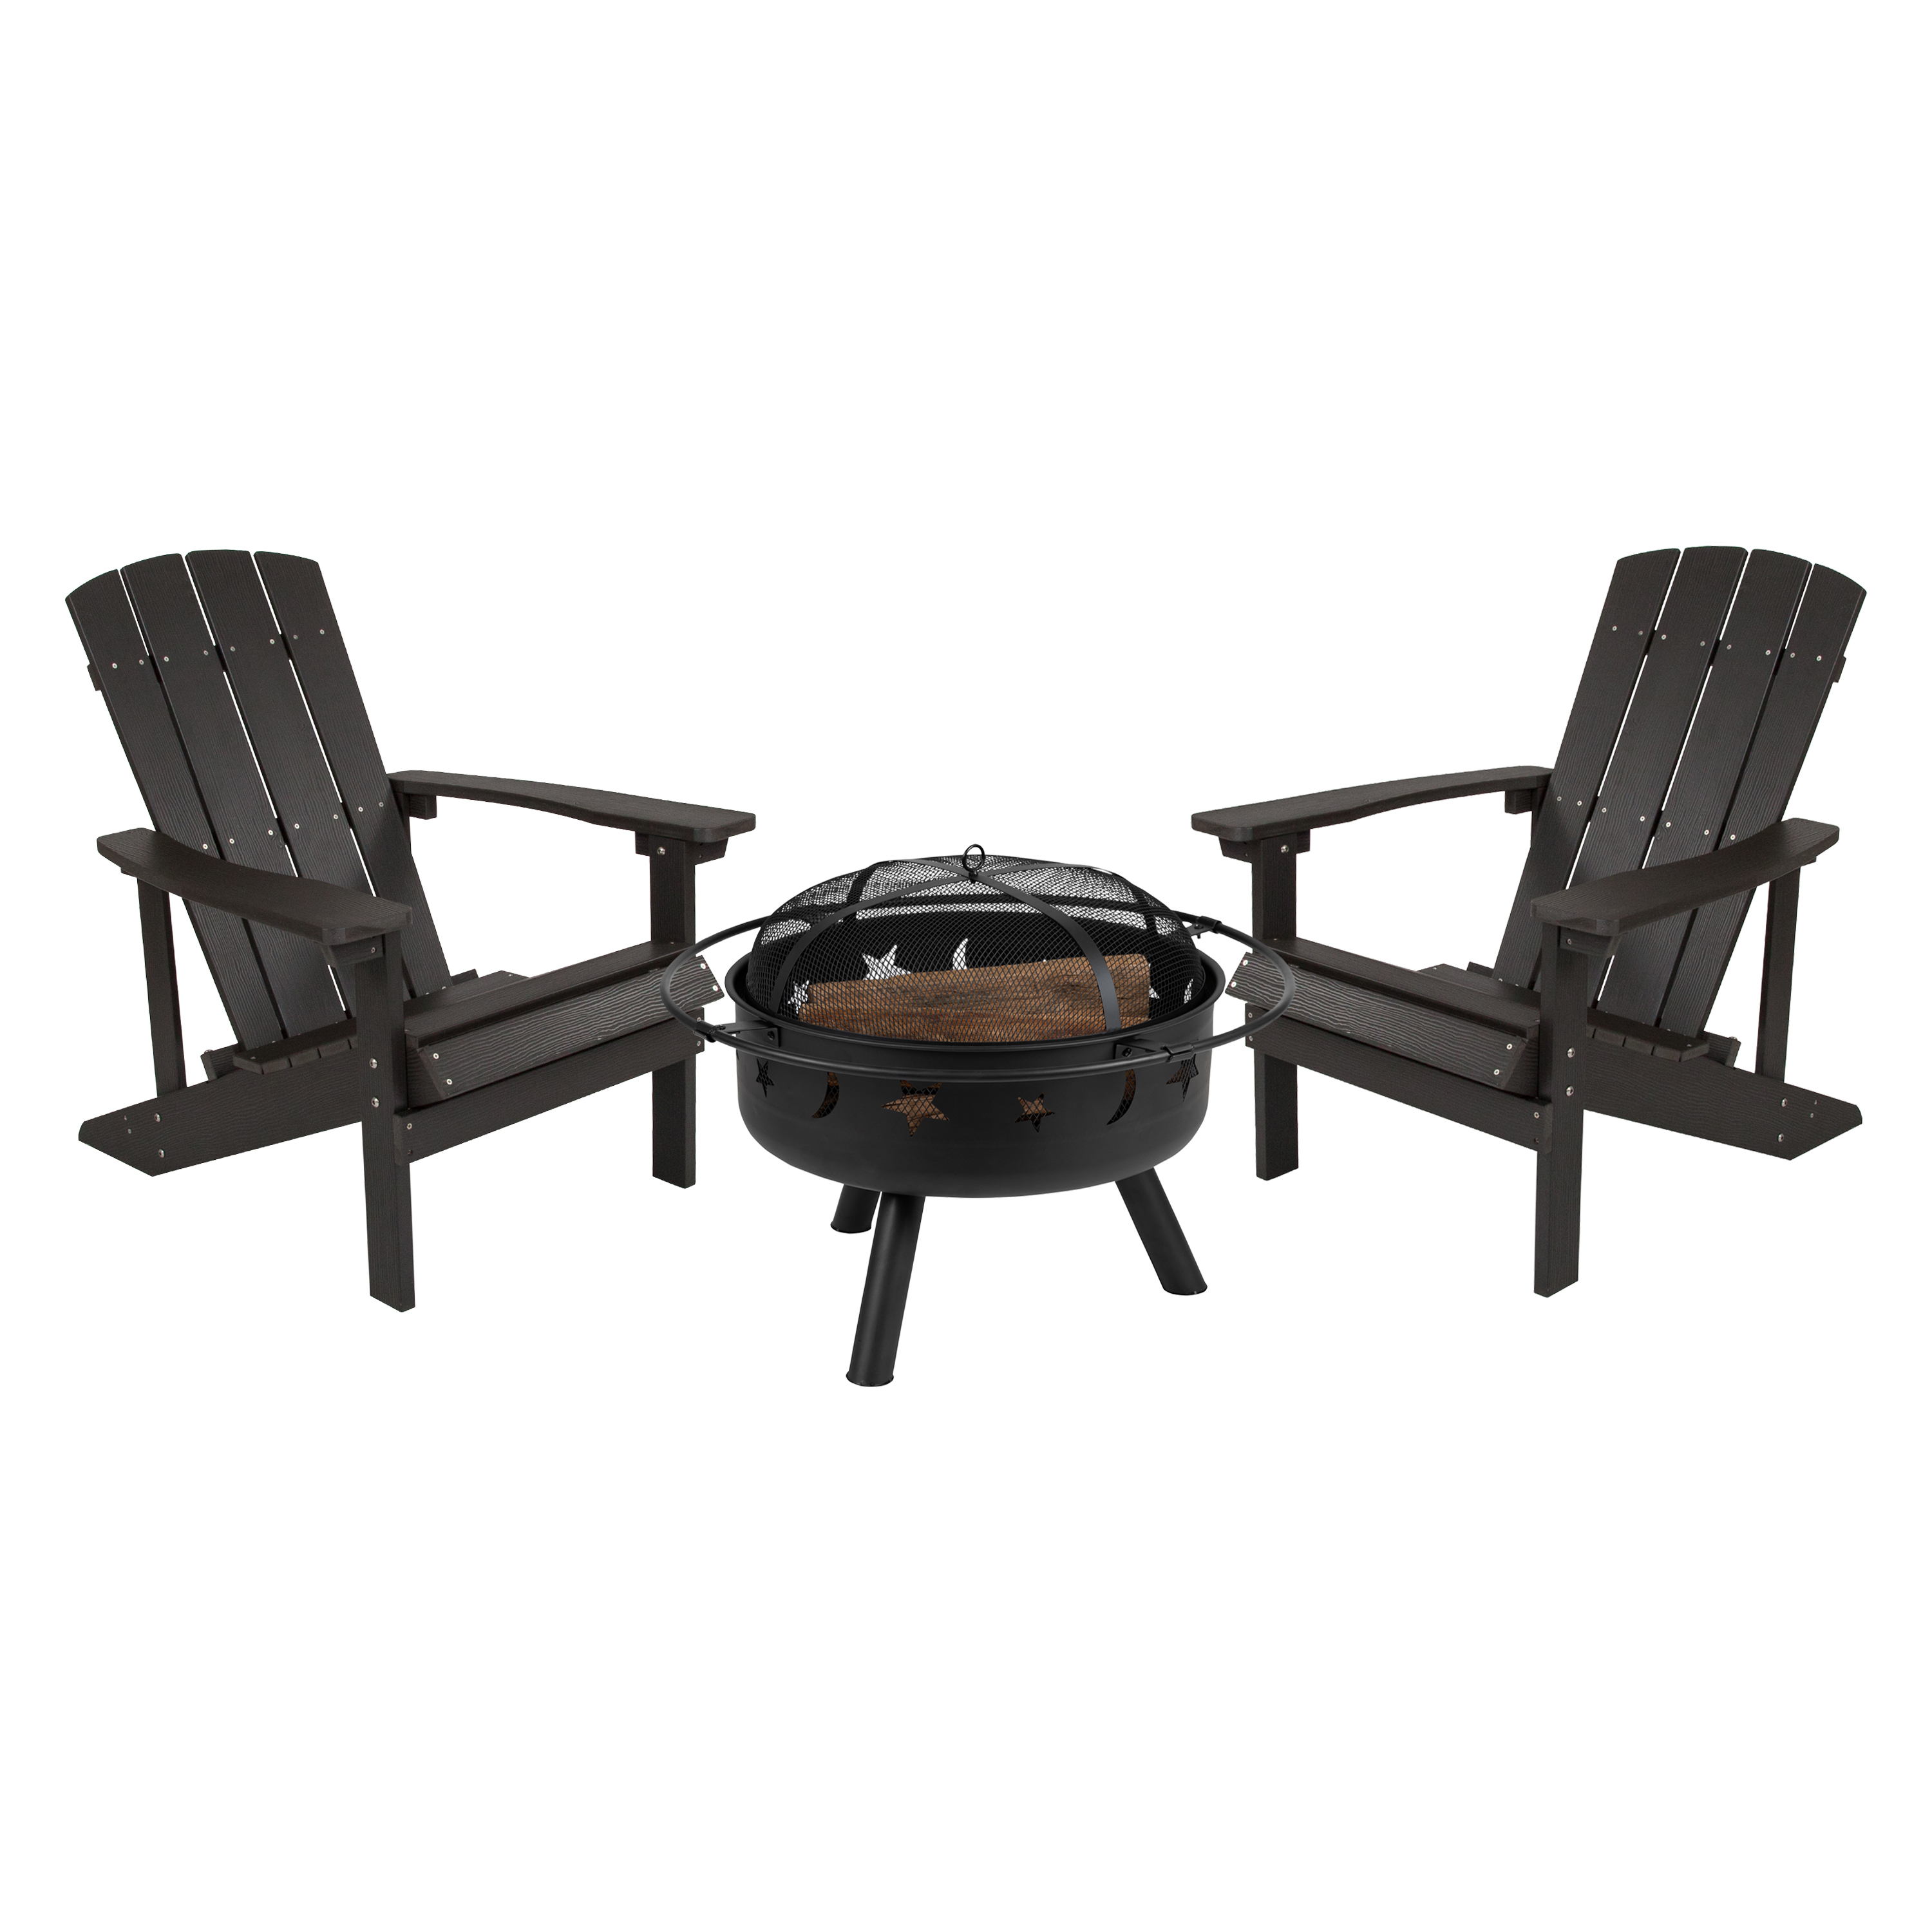 Flash Furniture JJ-C145012-32D-SLT-GG 3 Piece Slate Gray Poly Resin Wood Adirondack Chair Set with Fire Pit